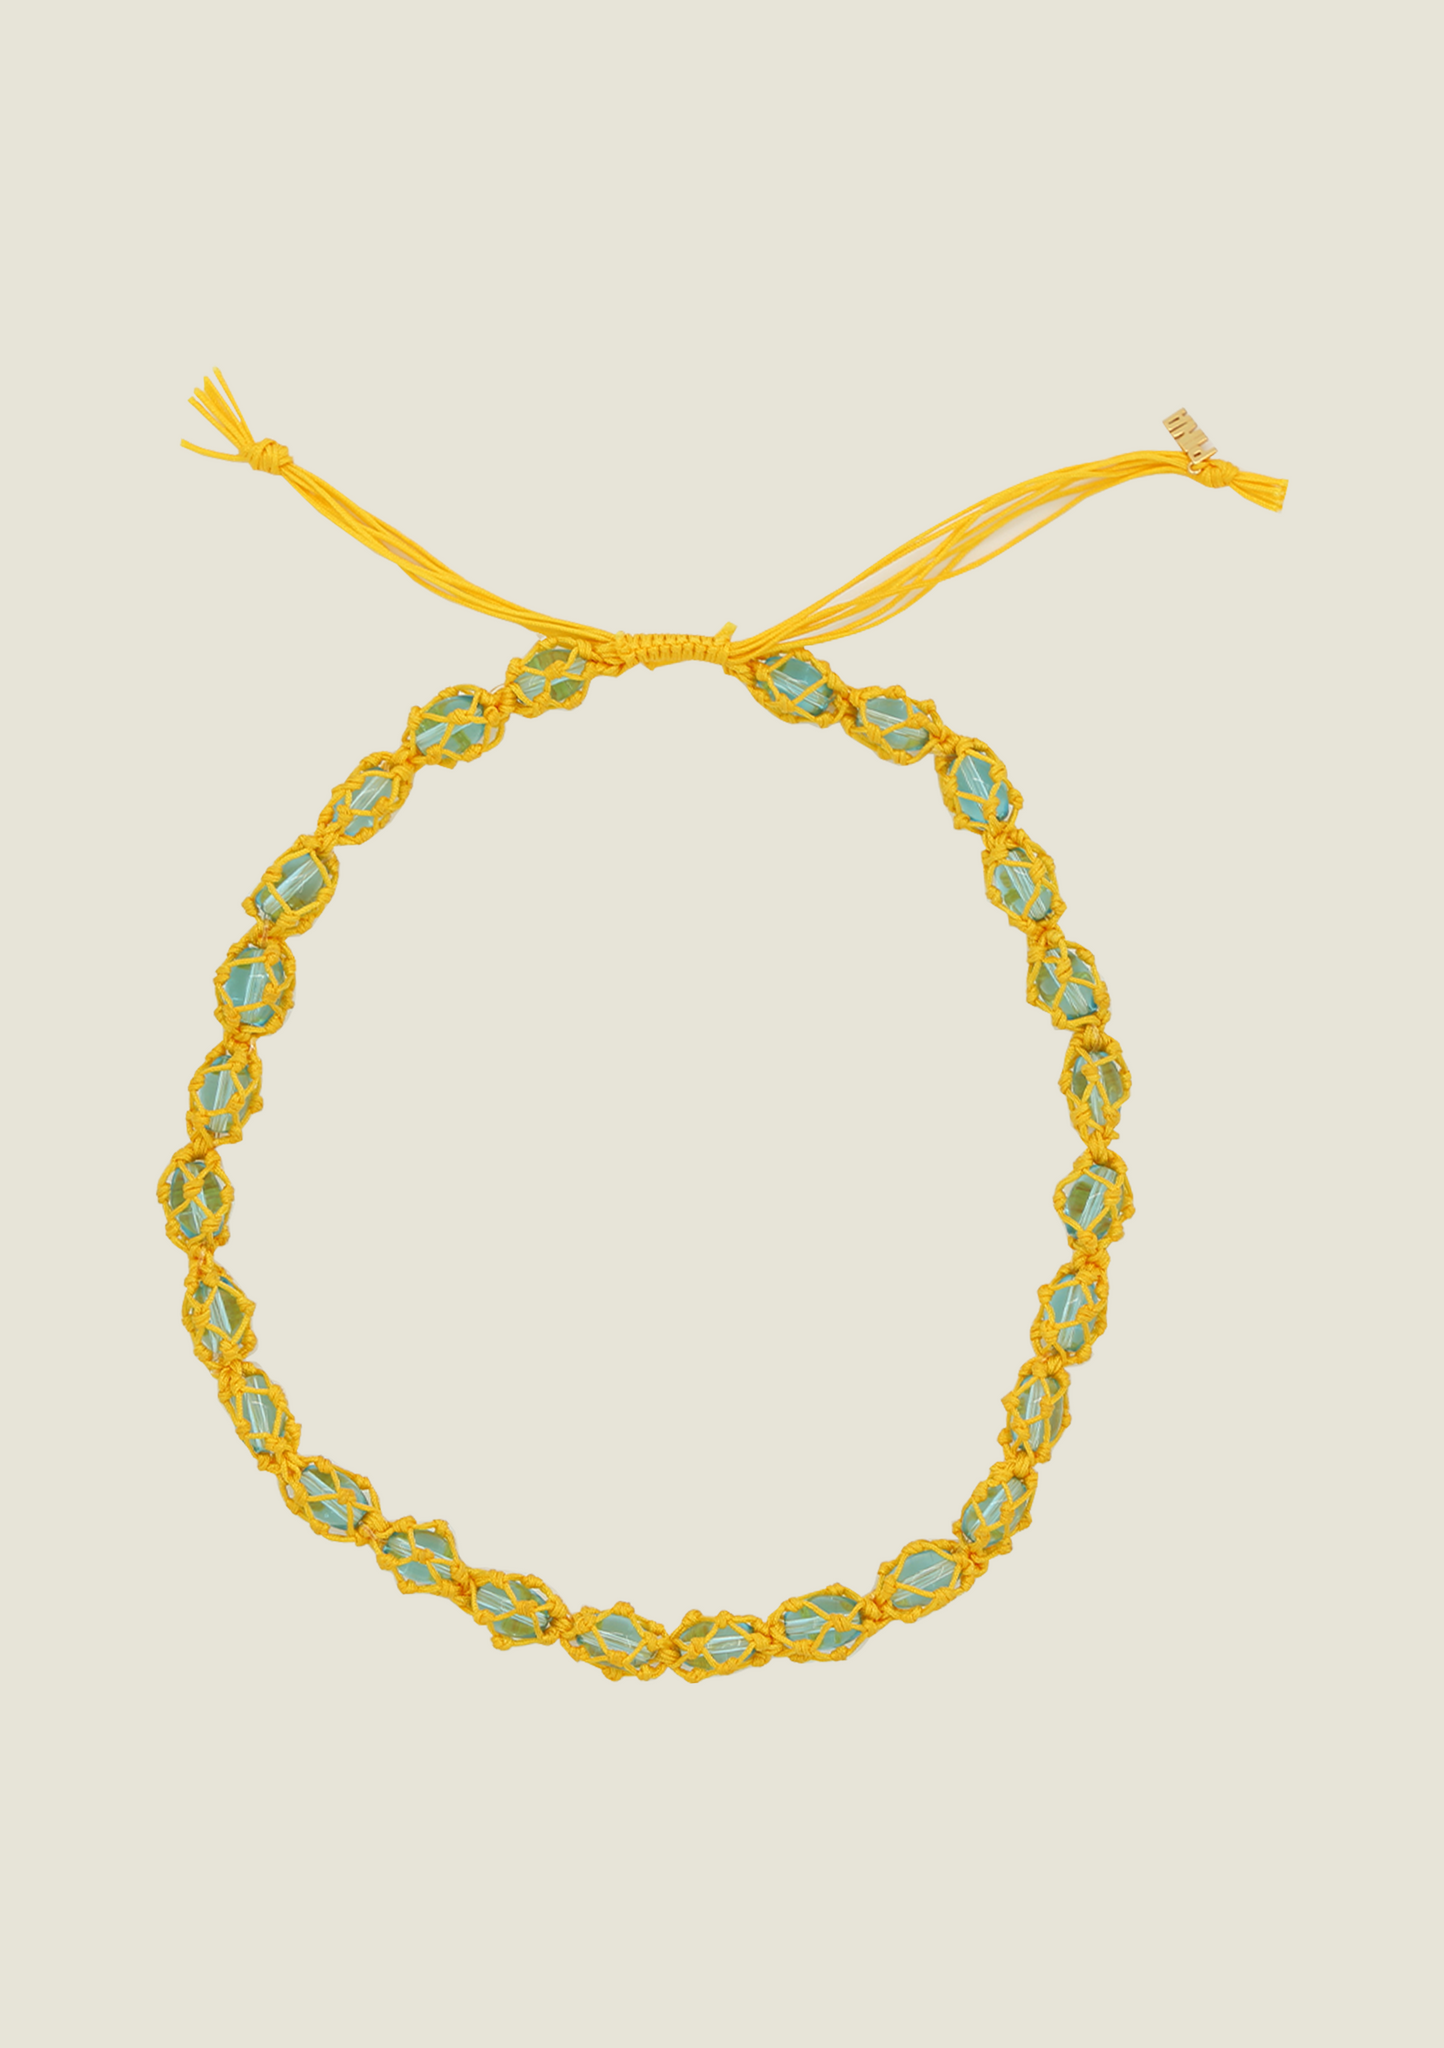 Melon Necklace - Yellow/Blue Bead